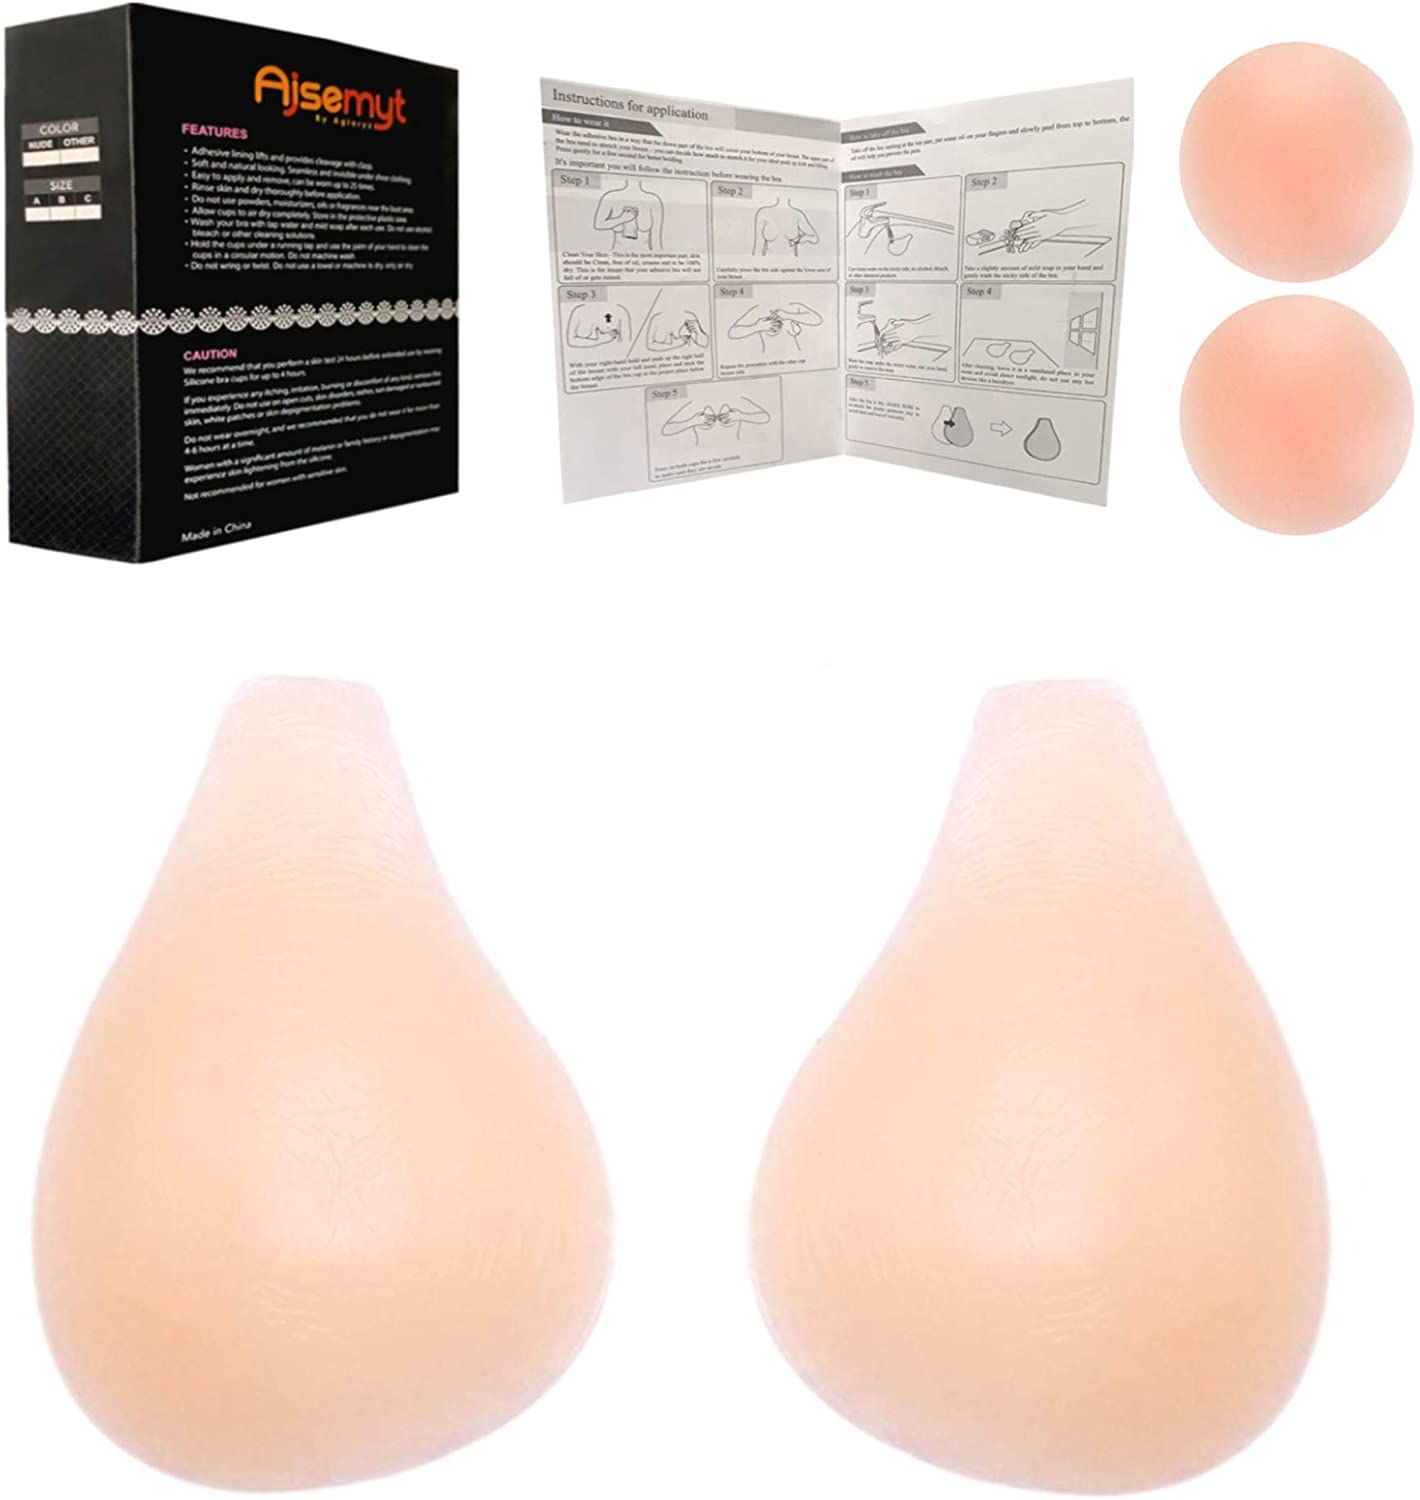 Price:$18.99 Silicone Adhesive Lift Bra, Invisible Backless Nipplecovers, Push Up Sticky Bra, Premium Quality and Safe Material, User Friendly Design, Natural Look, Washable and Reusable Nude at Amazon Women’s Clothing store